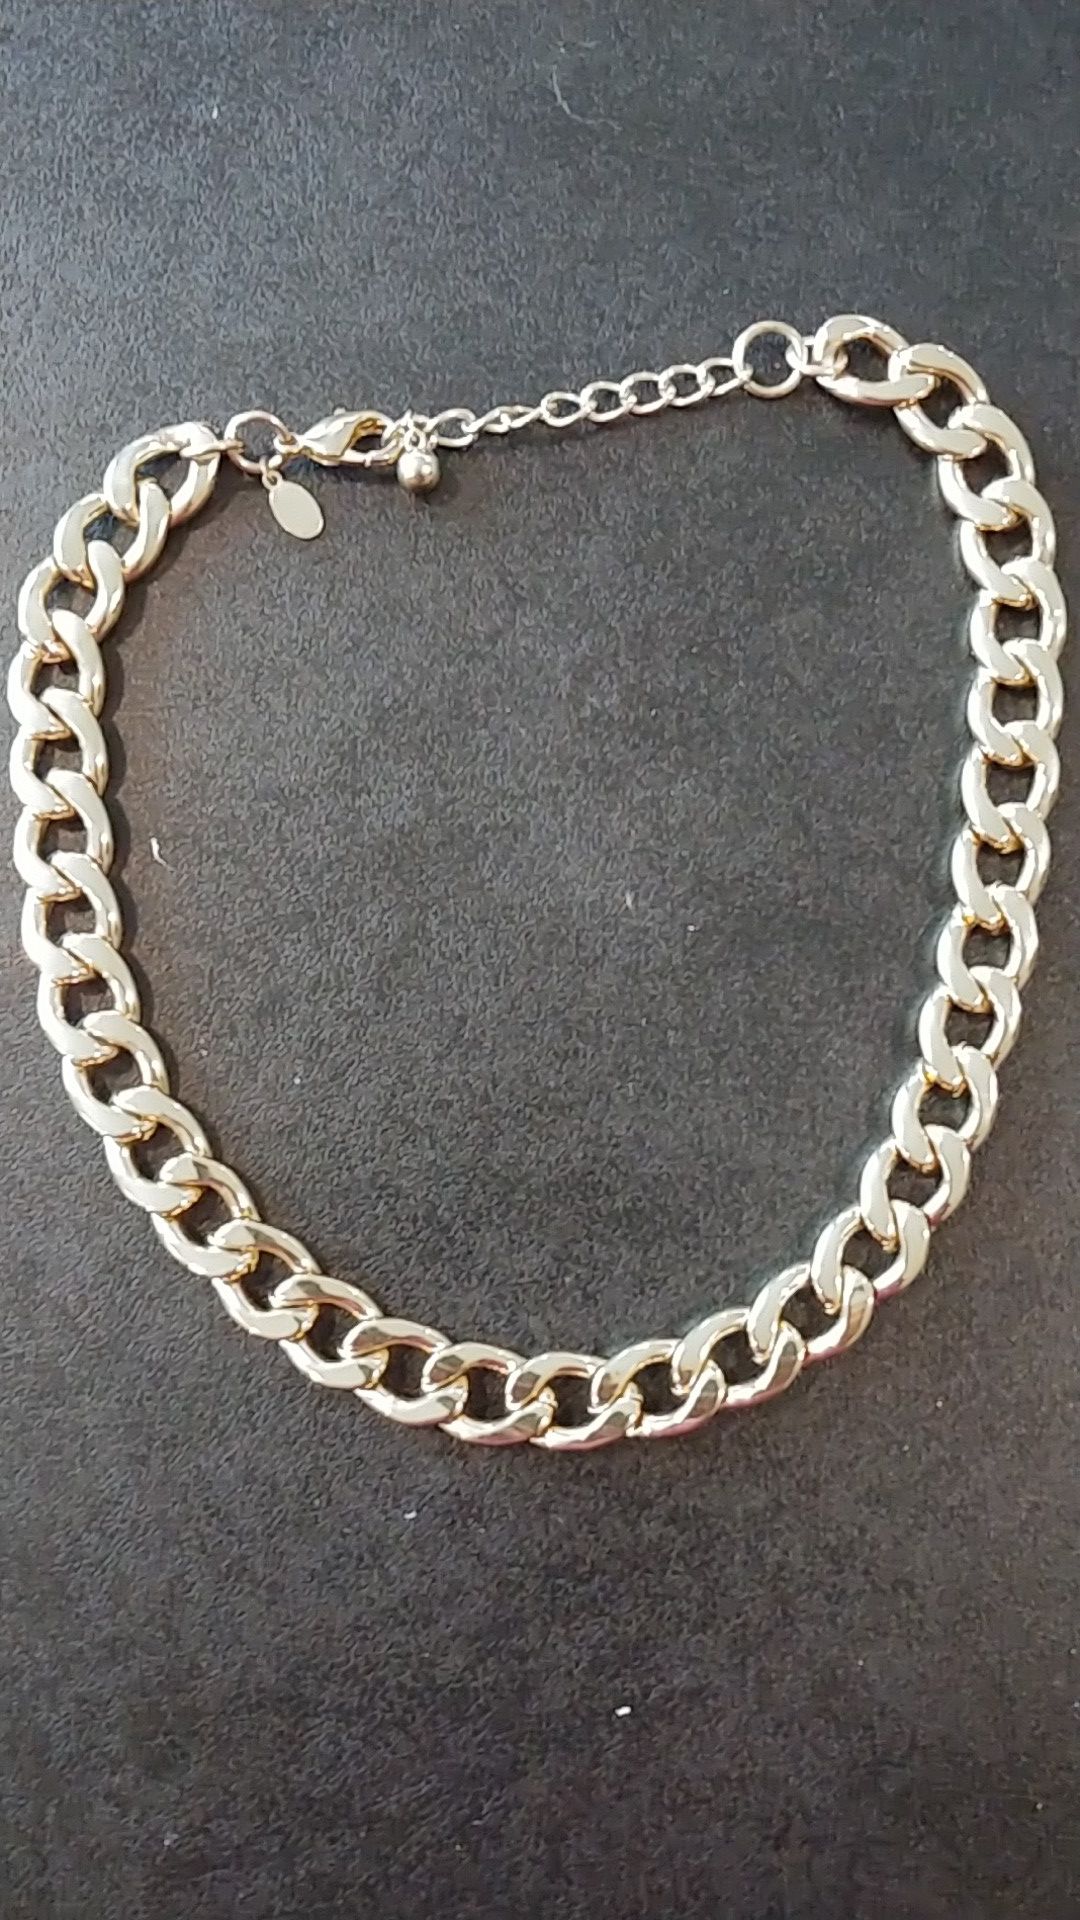 Express gold necklace.